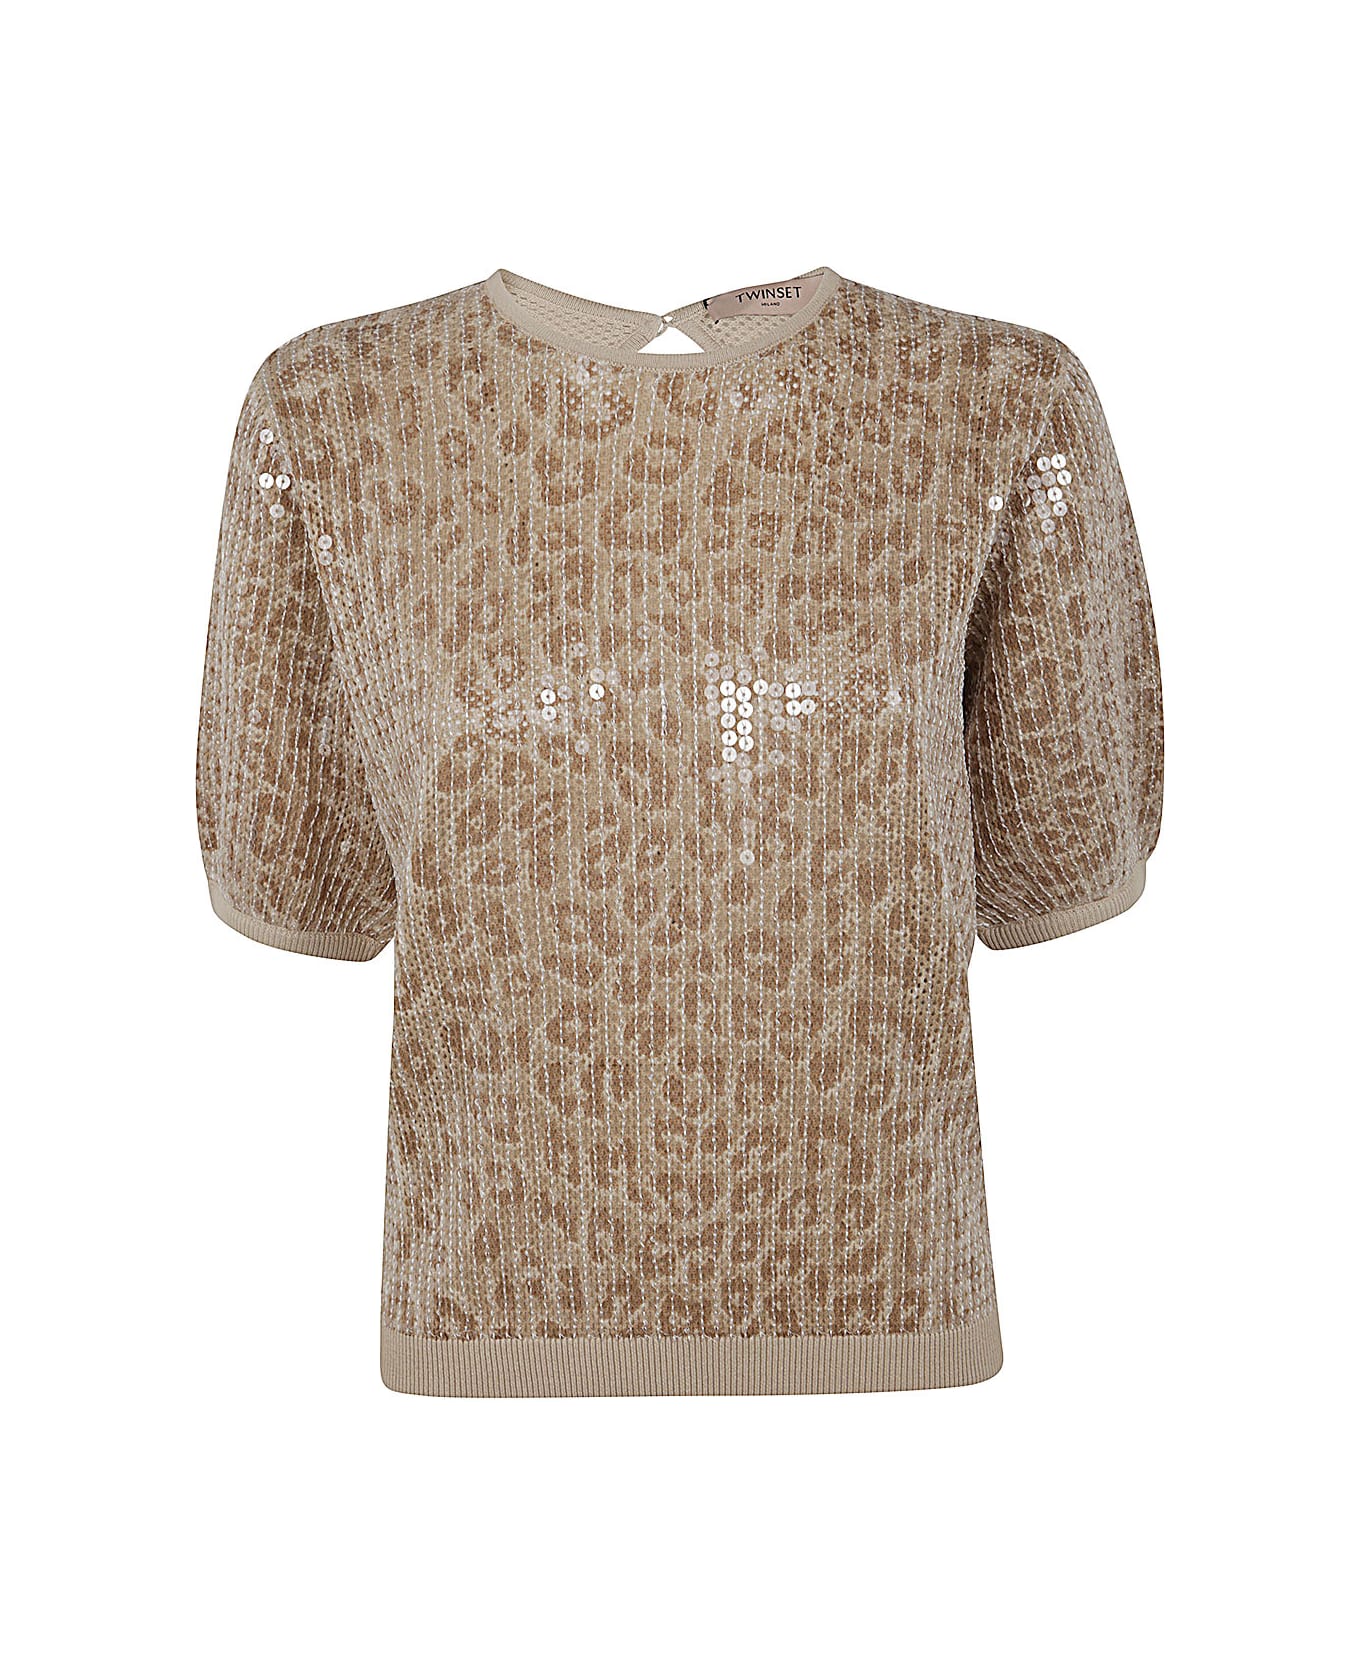 TwinSet Short Sleeve Sequined Pullover - Ginger Root ニットウェア